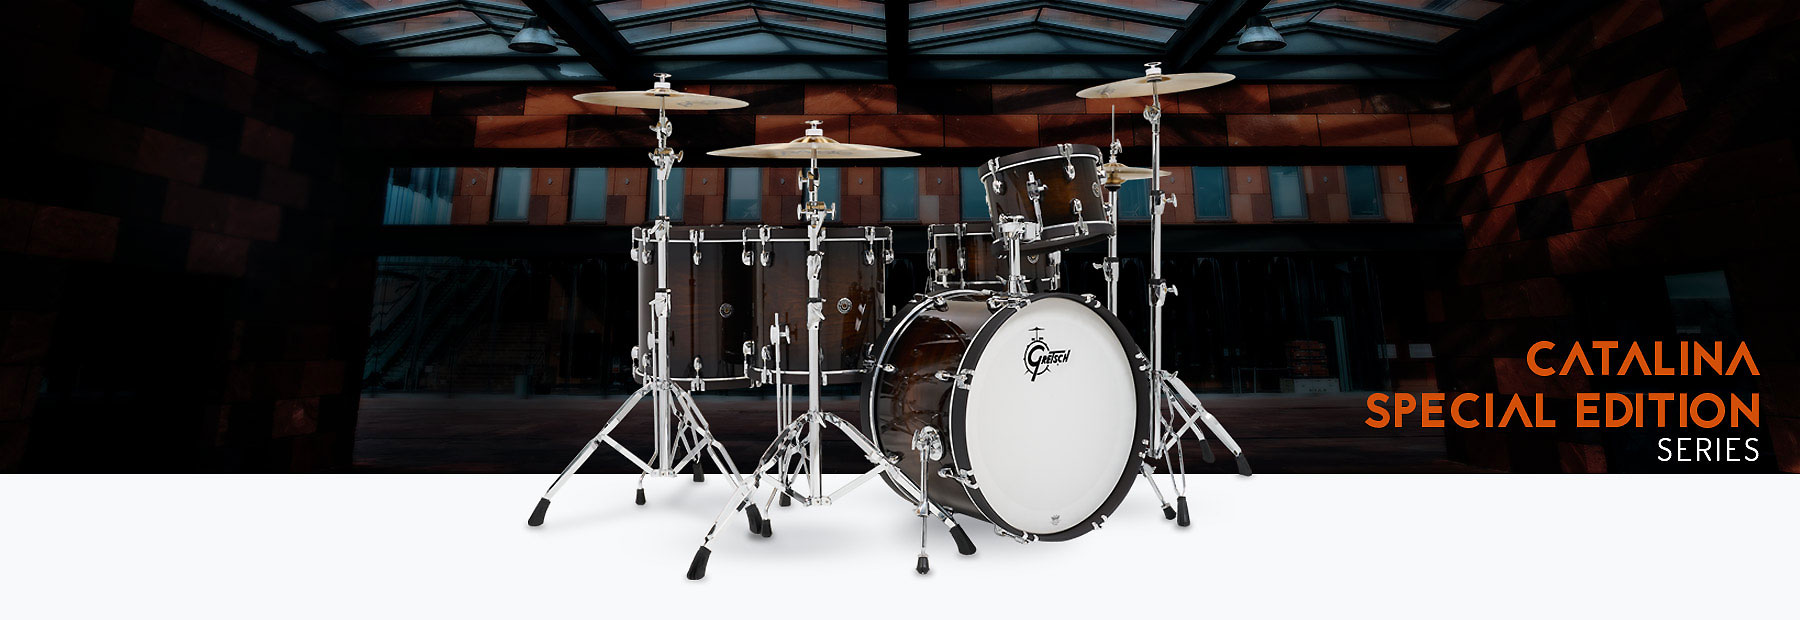 Gretsch Drums Catalina Special Edition